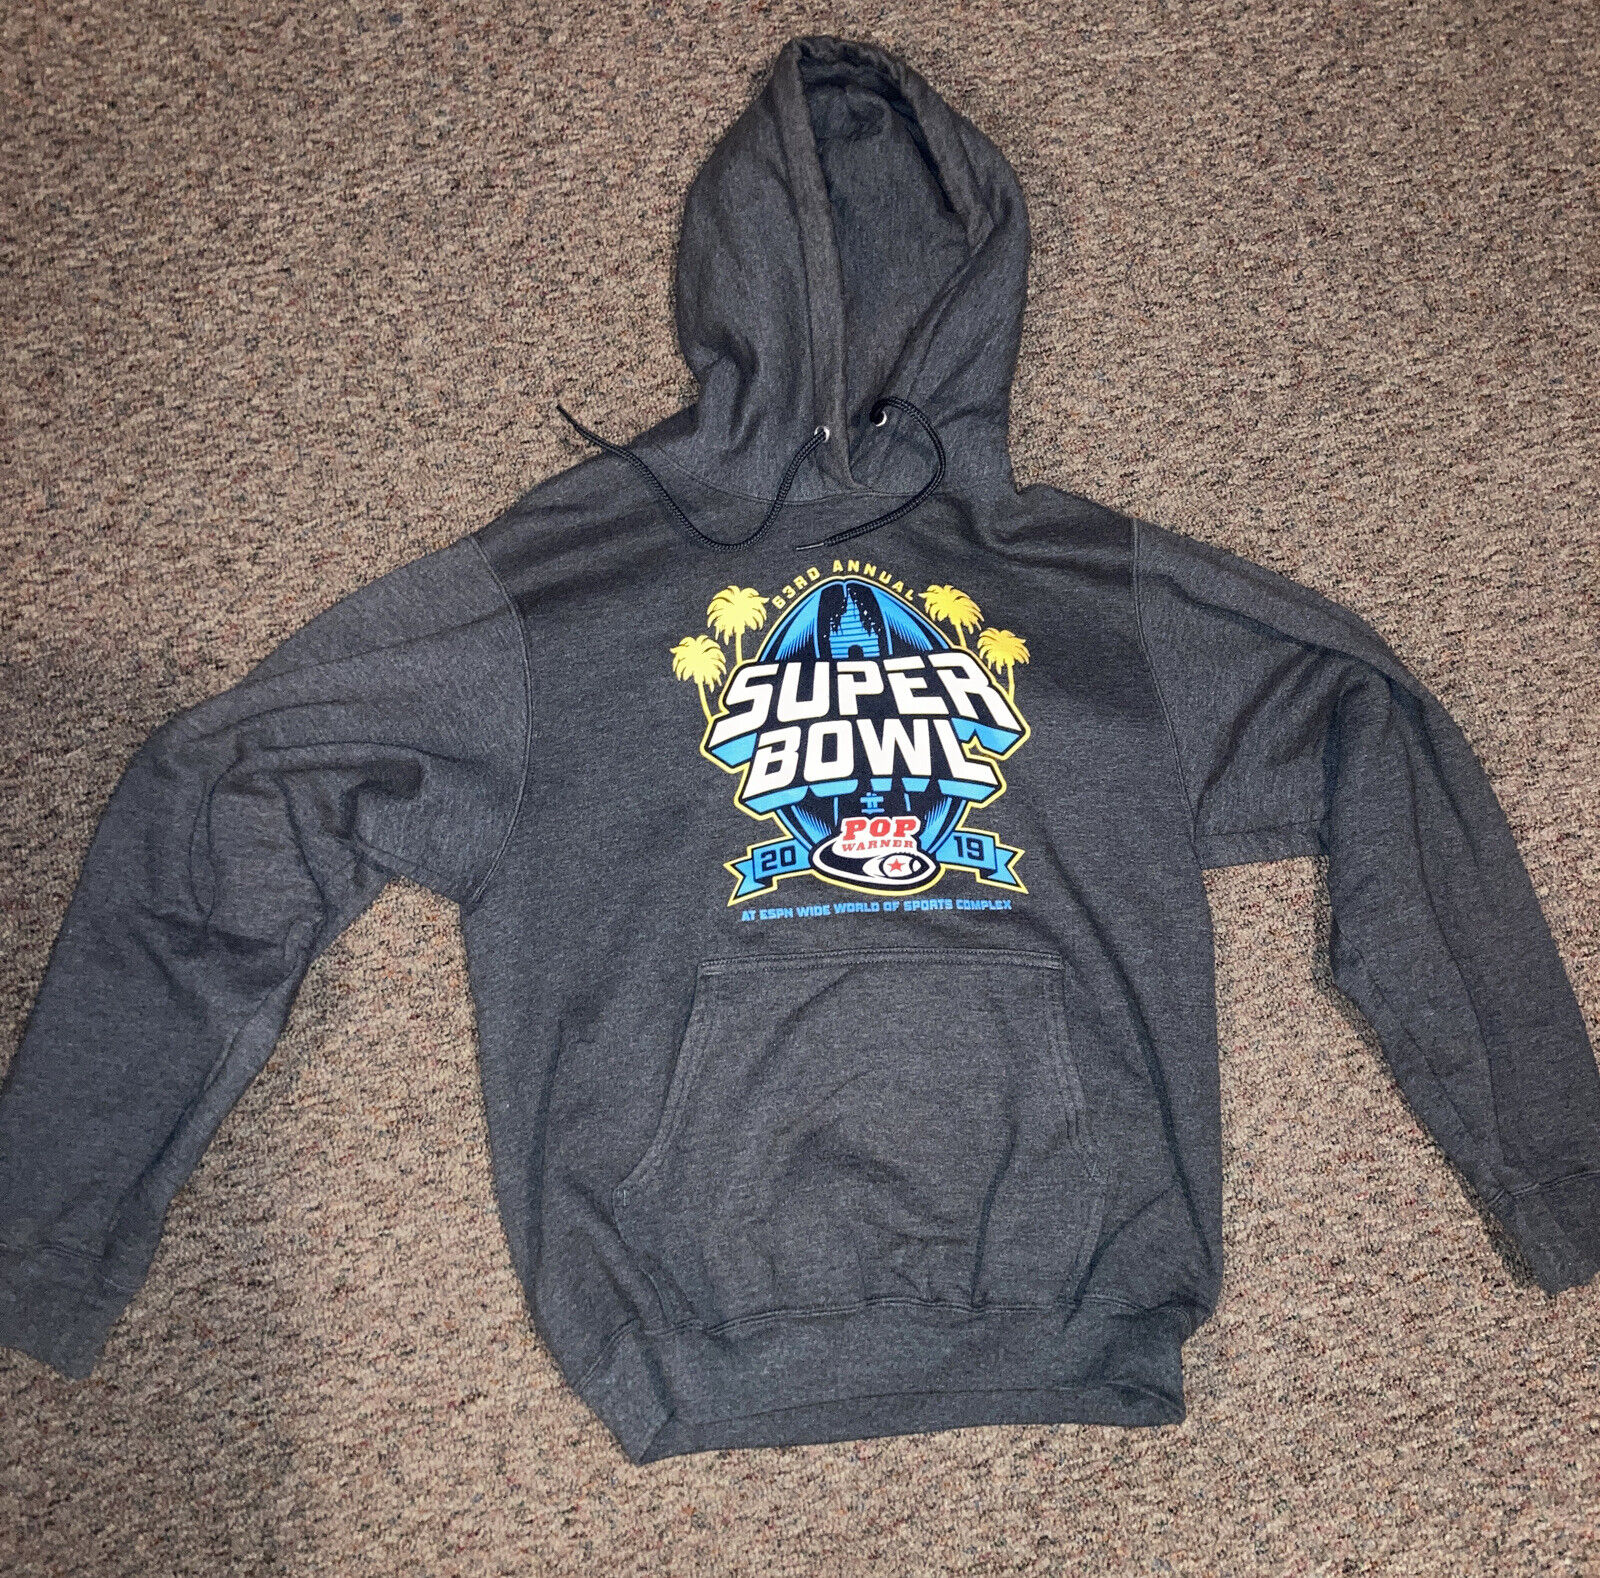 63rd Annual Super Bowl '19 hooded Pullover Sweatshirt 21.5 H x 17 from pit 2 pit